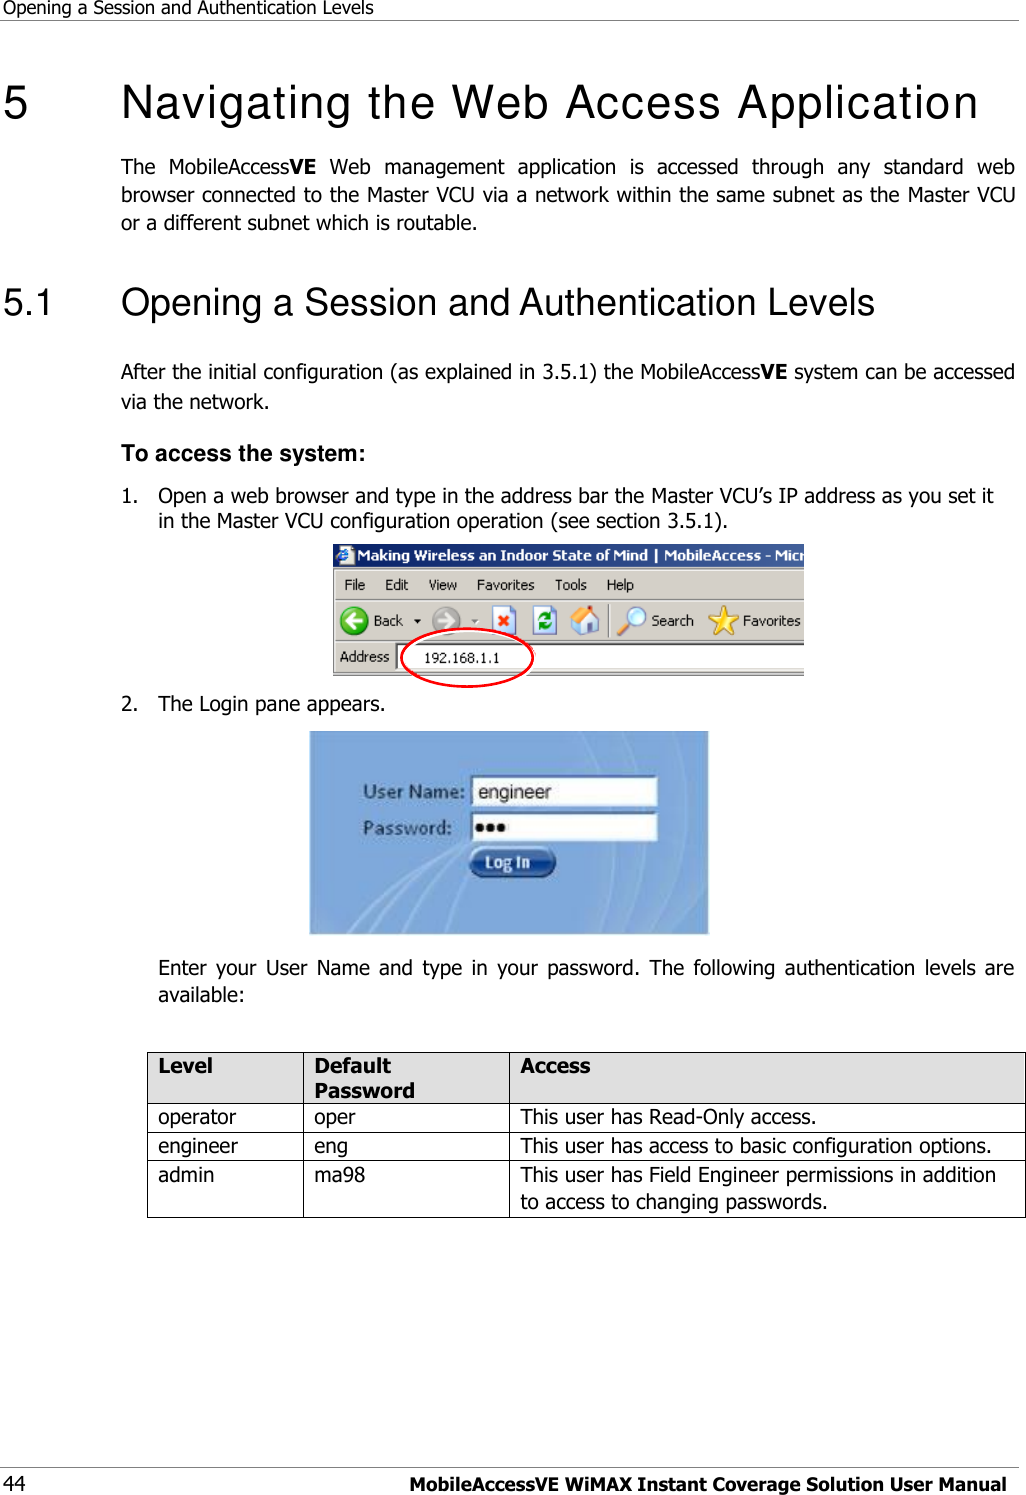 Opening a Session and Authentication Levels 44 MobileAccessVE WiMAX Instant Coverage Solution User Manual 5   Navigating the Web Access Application  The  MobileAccessVE  Web  management  application  is  accessed  through  any  standard  web browser connected to the Master VCU via a network within the same subnet as the Master VCU or a different subnet which is routable. 5.1  Opening a Session and Authentication Levels After the initial configuration (as explained in 3.5.1) the MobileAccessVE system can be accessed via the network.  To access the system: 1.  Open a web browser and type in the address bar the Master VCU‟s IP address as you set it in the Master VCU configuration operation (see section 3.5.1).  2.  The Login pane appears.   Enter  your  User  Name  and  type  in  your  password.  The  following  authentication  levels  are available:  Level Default Password Access  operator oper  This user has Read-Only access. engineer eng This user has access to basic configuration options. admin ma98 This user has Field Engineer permissions in addition to access to changing passwords.  